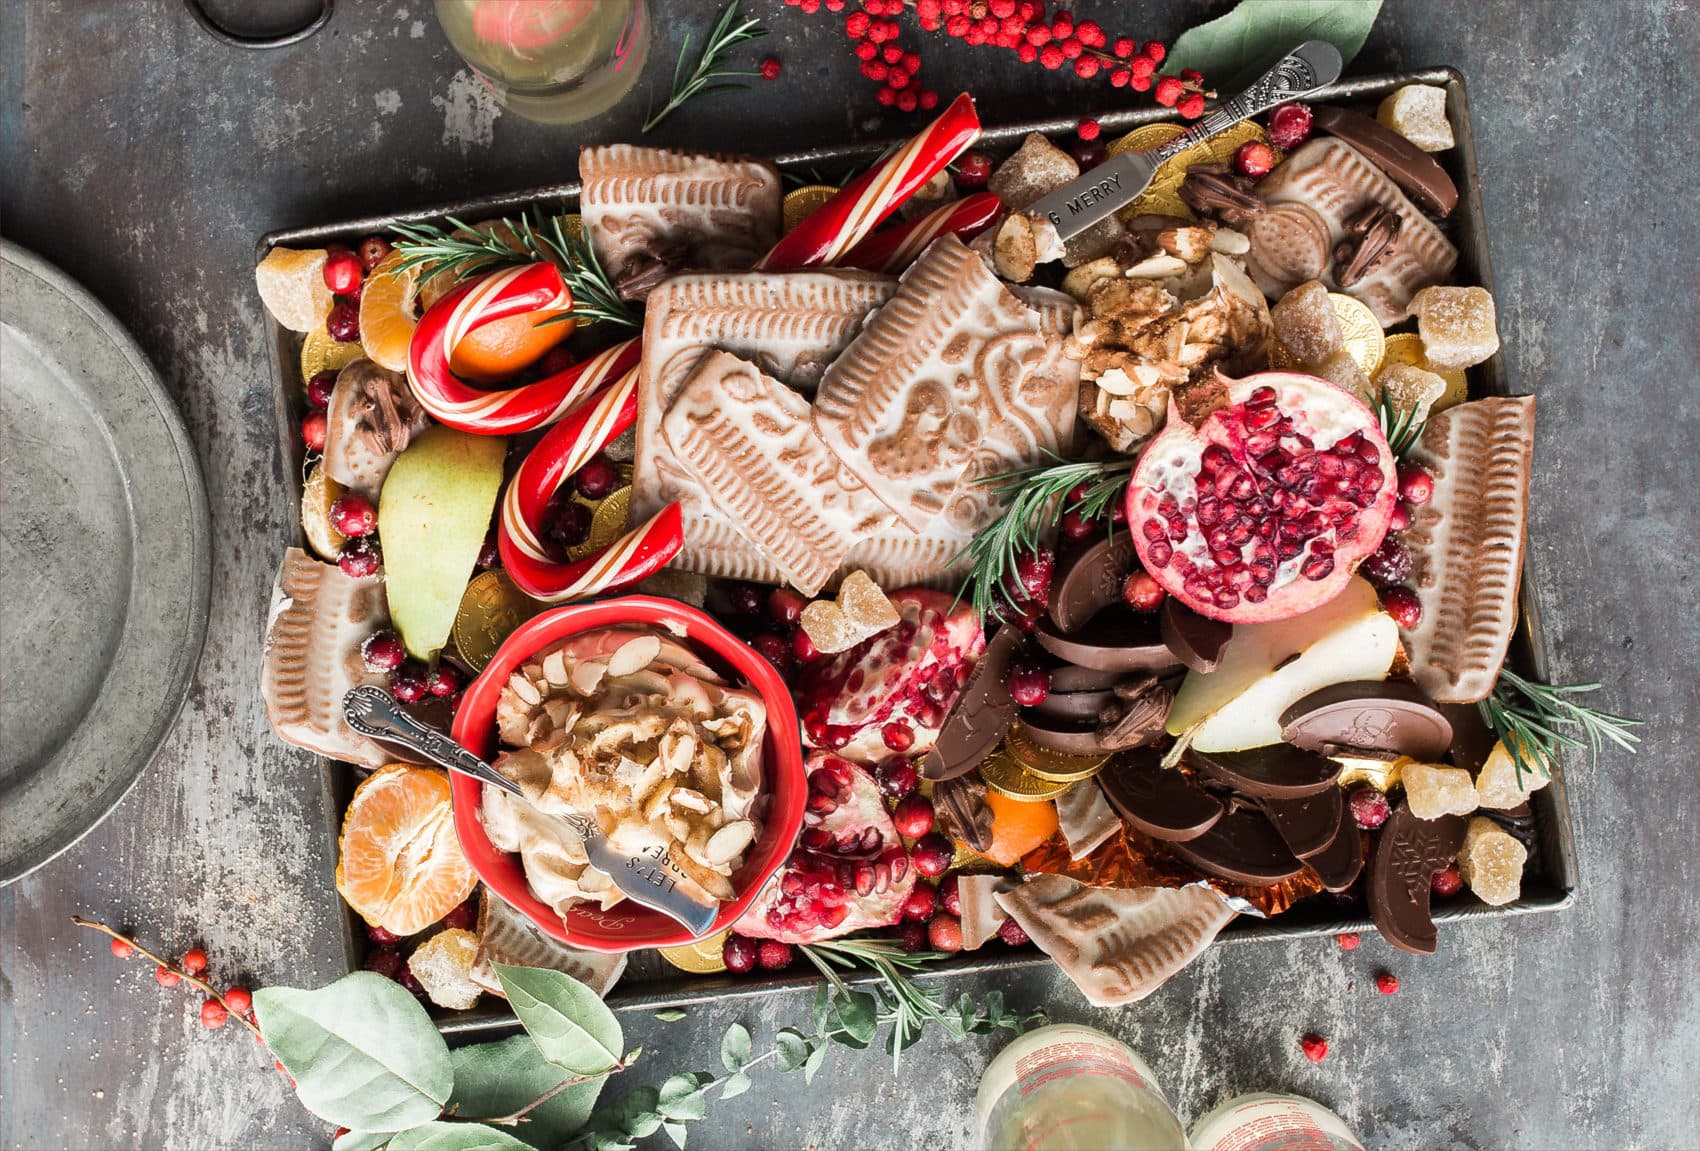 Holiday Guide: Cutting Down on Food Waste